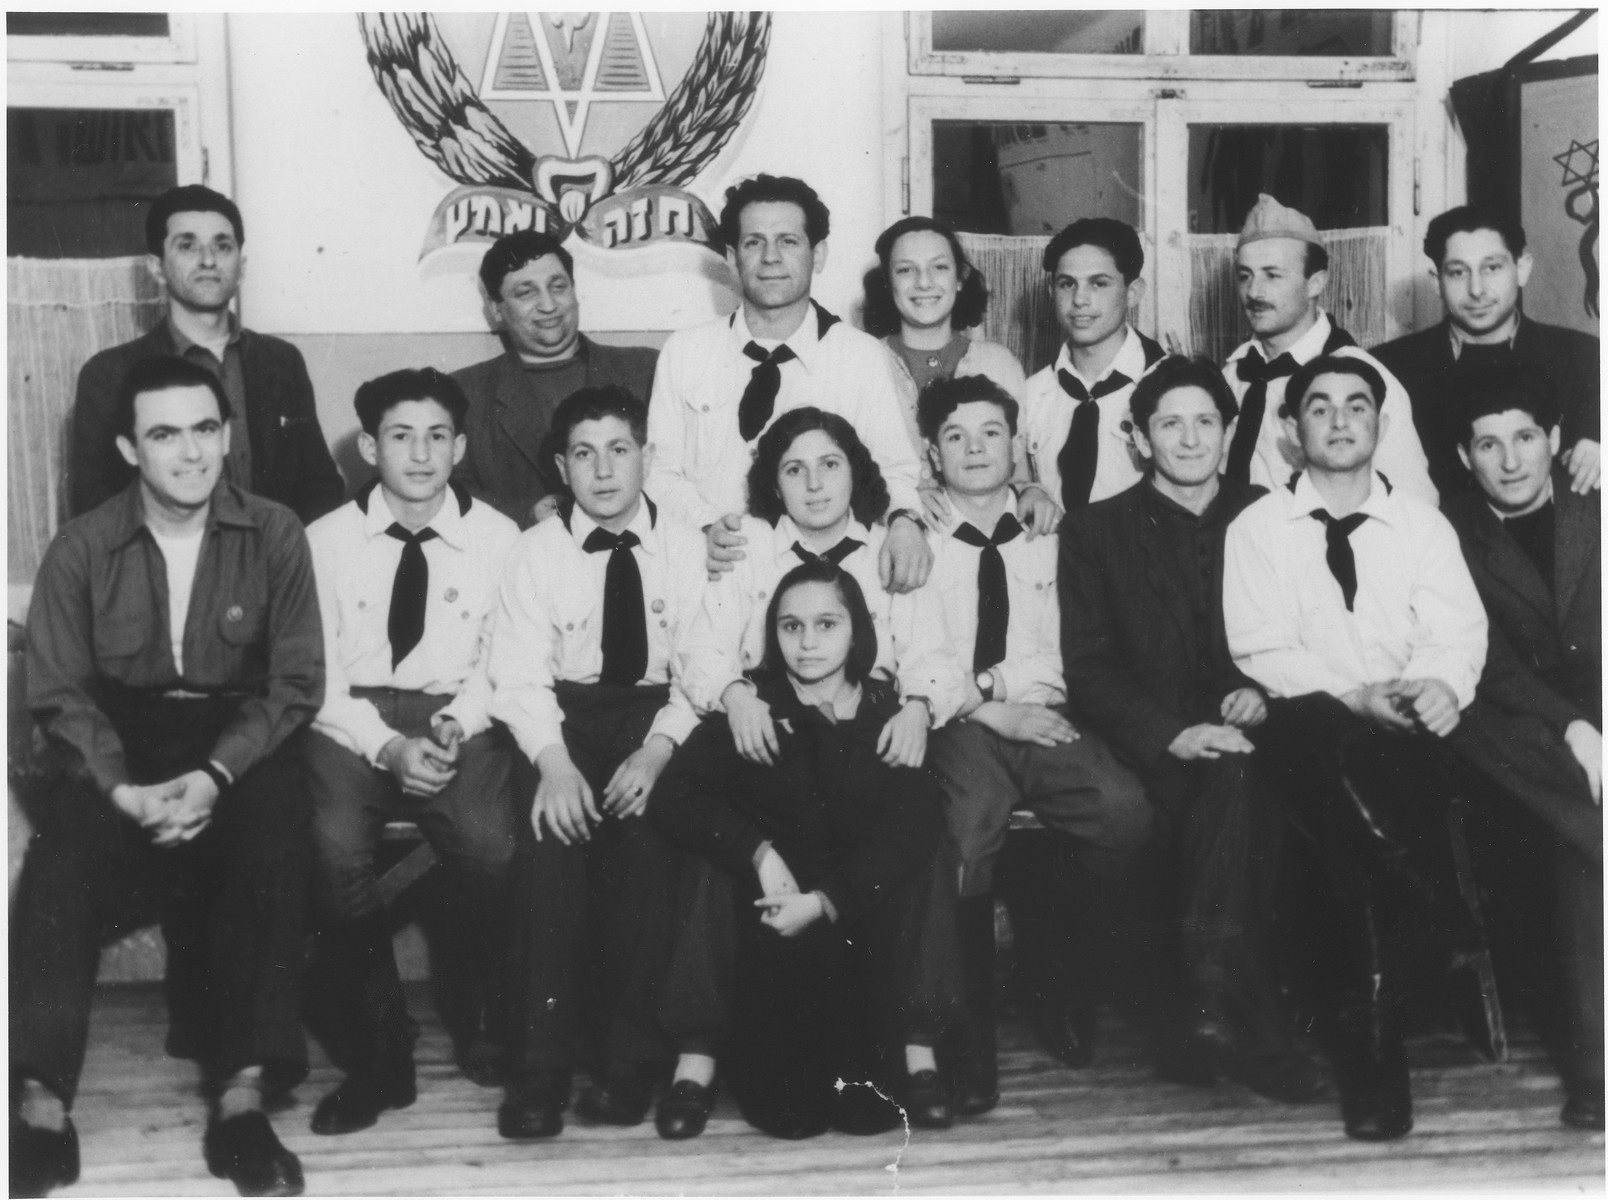 Group portrait of Jewish scouts in the Wetzlar displaced persons camp.  

On the wall is the scout emblem with the Hebrew motto, "Be strong and brave".